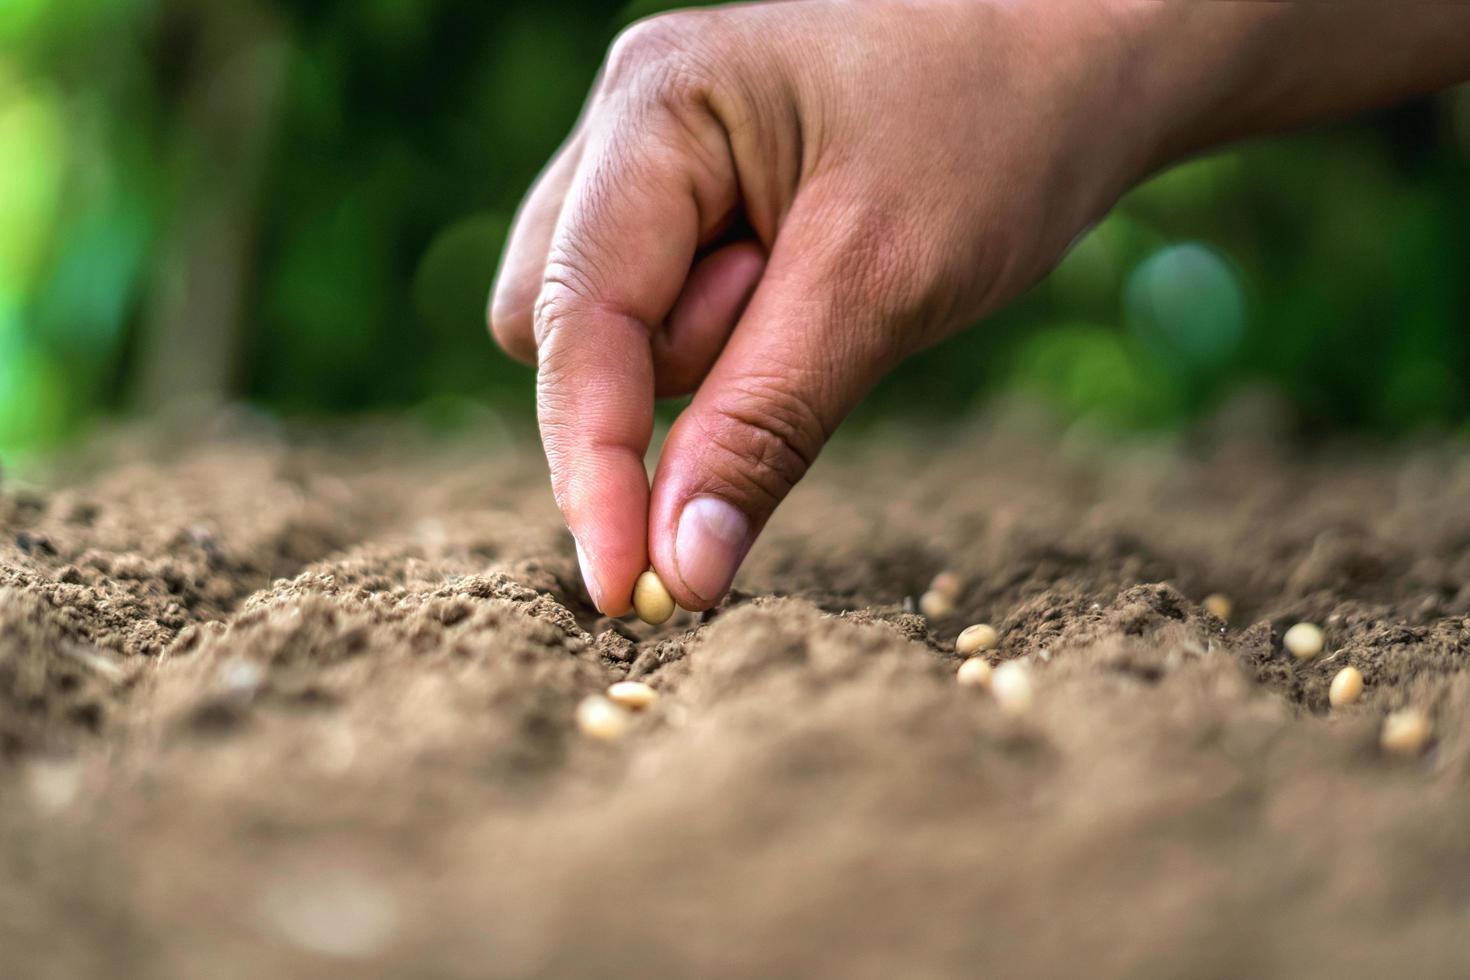 hand planting soy seed in the vegetable garden. agriculture concept photo